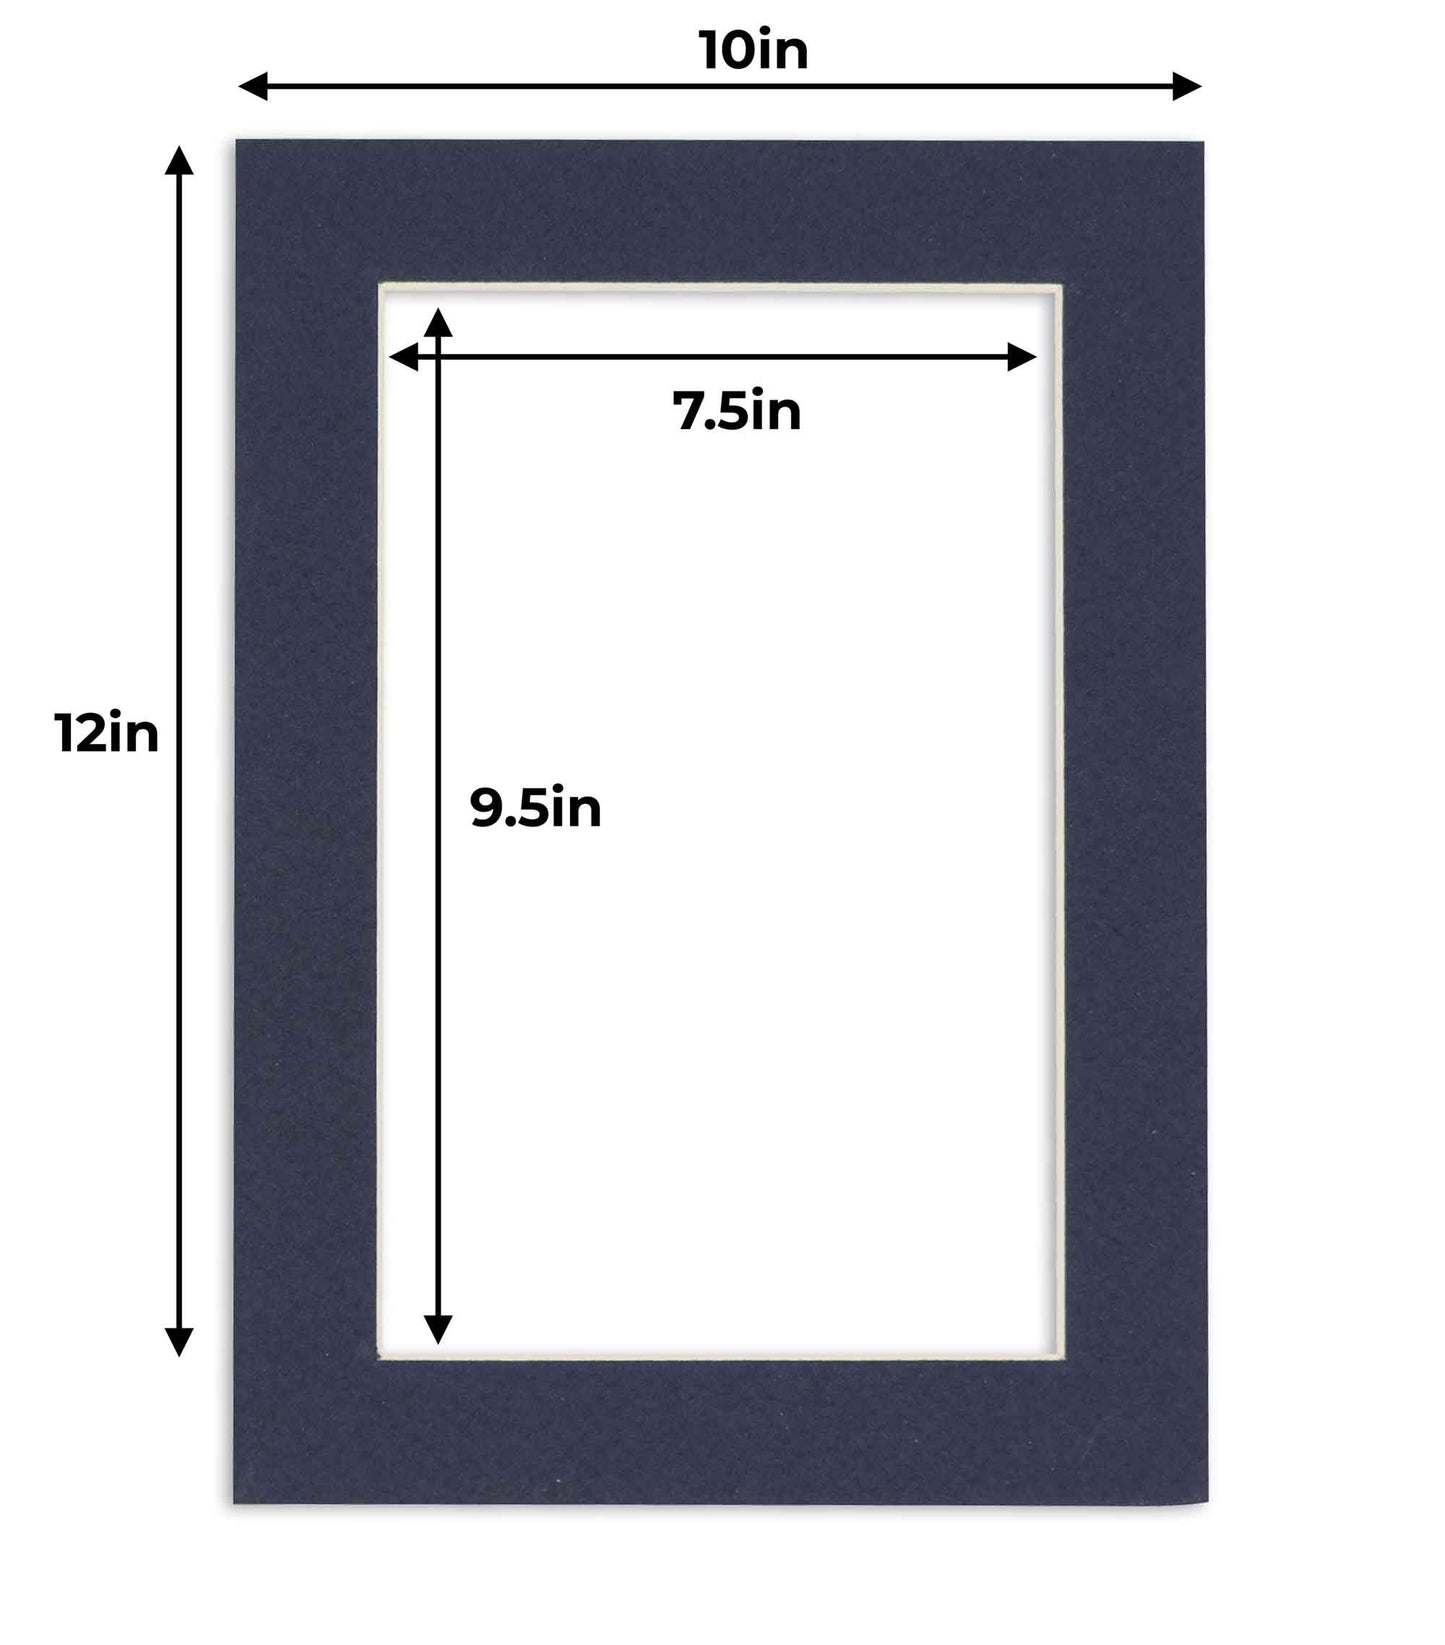 Pack of 25 Navy Blue Precut Acid-Free Matboard Set with Clear Bags & Backings